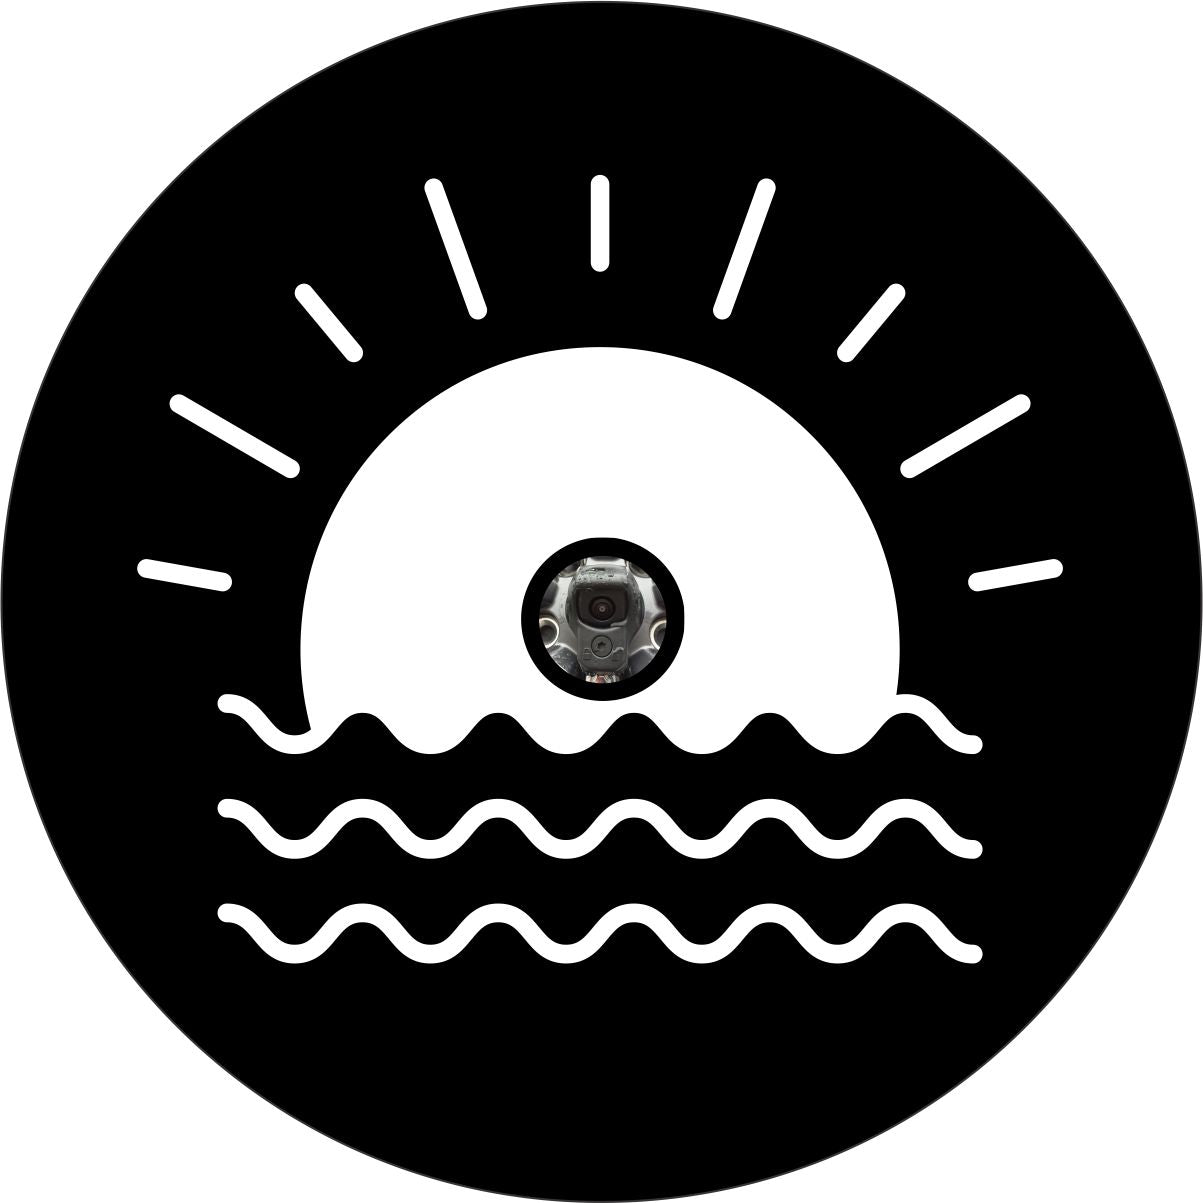 A simple sun sitting and setting on the water spare tire cover design with a hole for a backup camera.